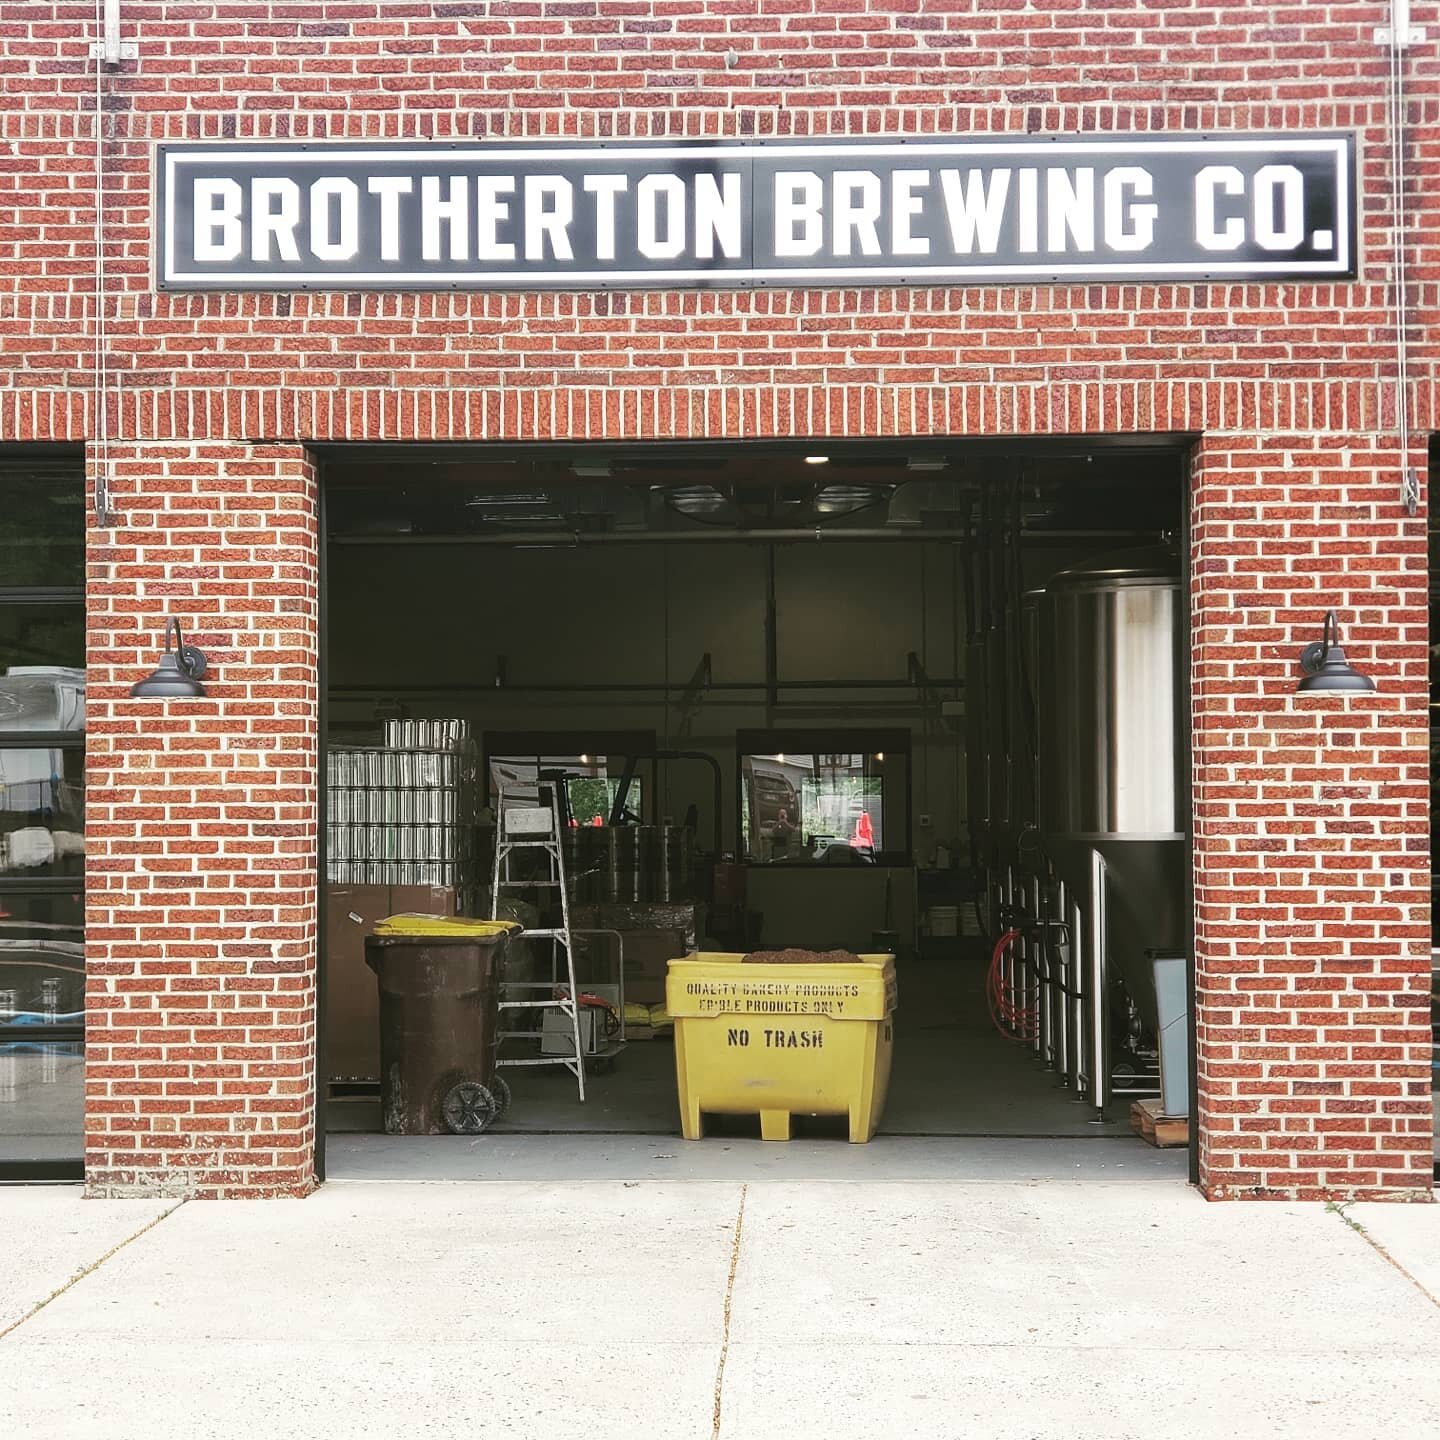 Here we Grow! Stop by Brotherton Brewery for some great beer and a great time. The atmosphere is fantastic both inside and out..AND the have JBJ Snacks too!

#brothertonbrewing #brewery #brewpub #atco #nj #sj #beer #atconj #craftbeer #jerseyboysjerky